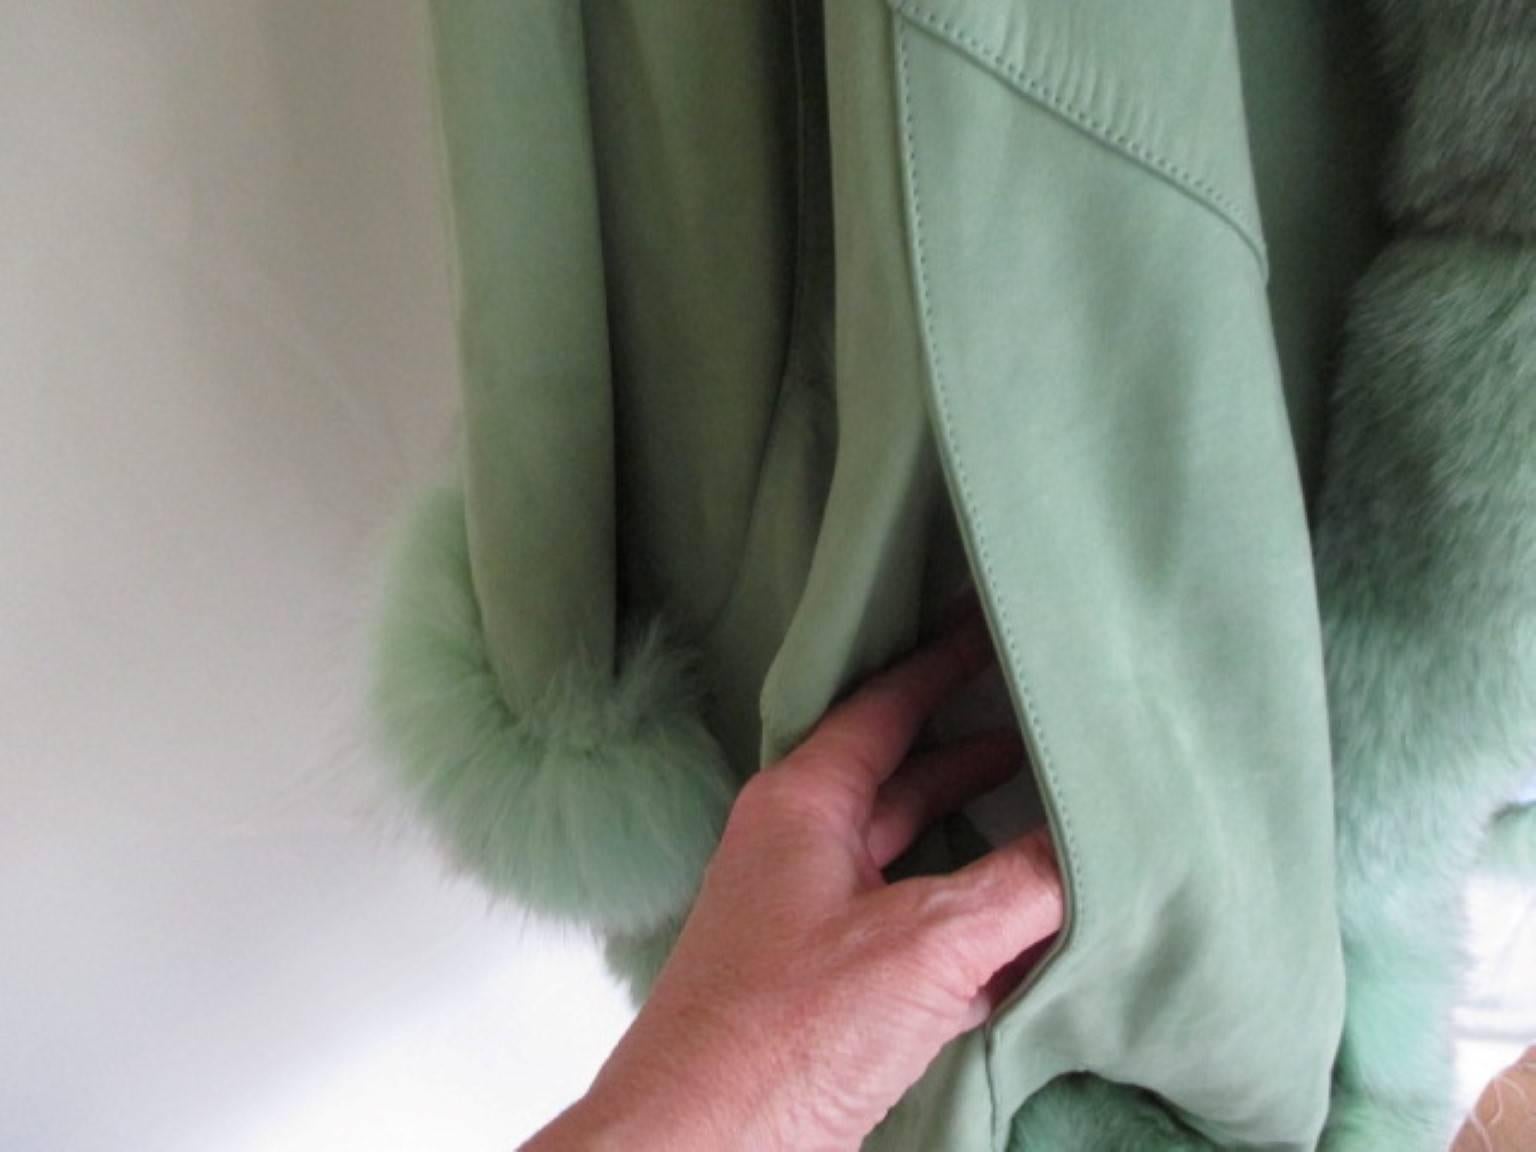 This cape has 2 pockets, side arms and is made from very soft suede with fox fur.
1 closing button at the front.
The total width of the cape is about 260 CM.
Size is medium to large